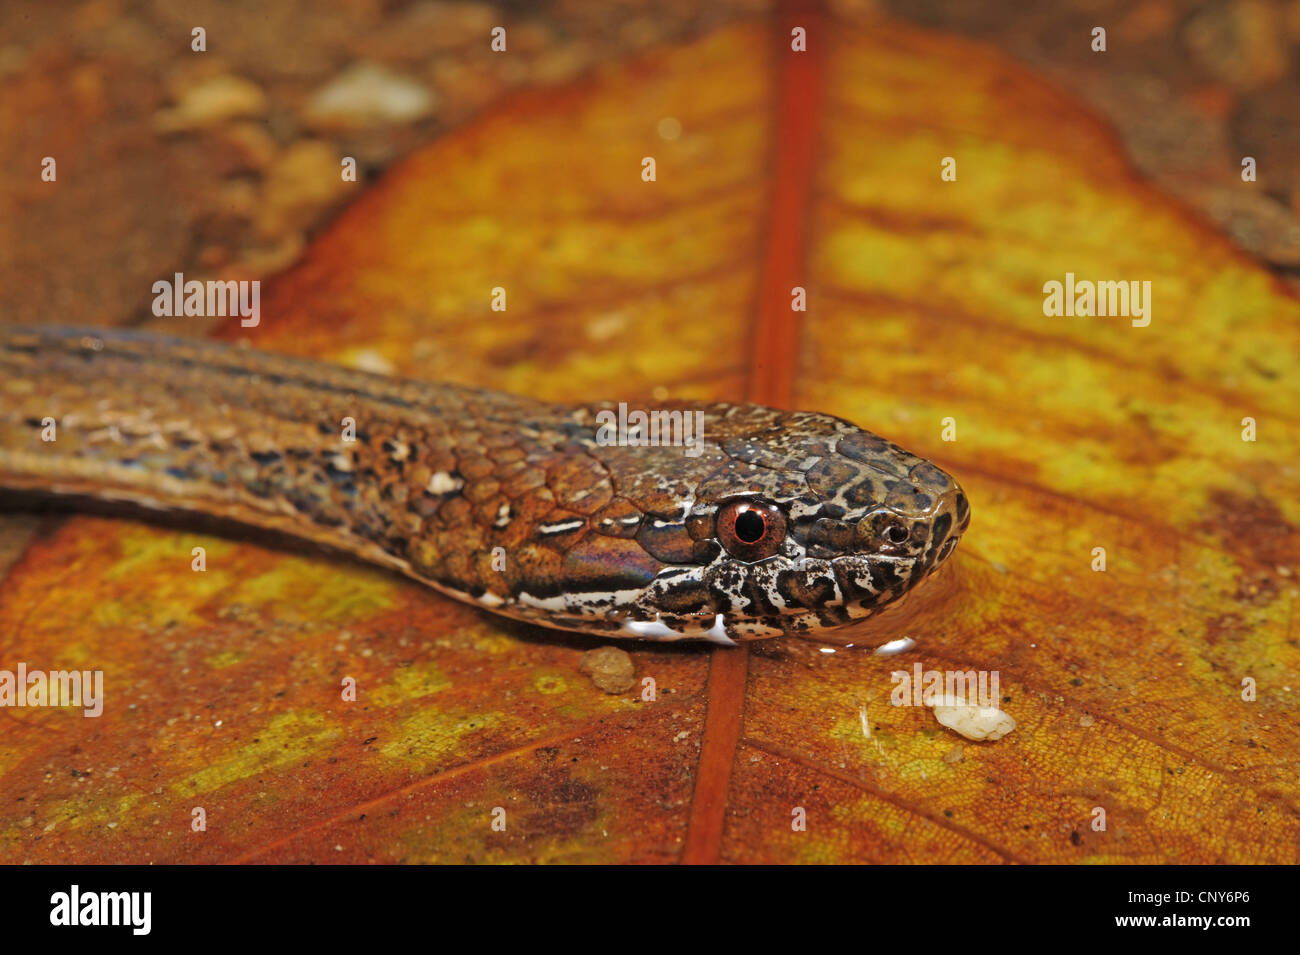 two-spotted snake, mottled-jaw spot-bellied snake (Coniophanes bipunctatus), lateral portrait on a dry leaf, Honduras, Roatan Stock Photo